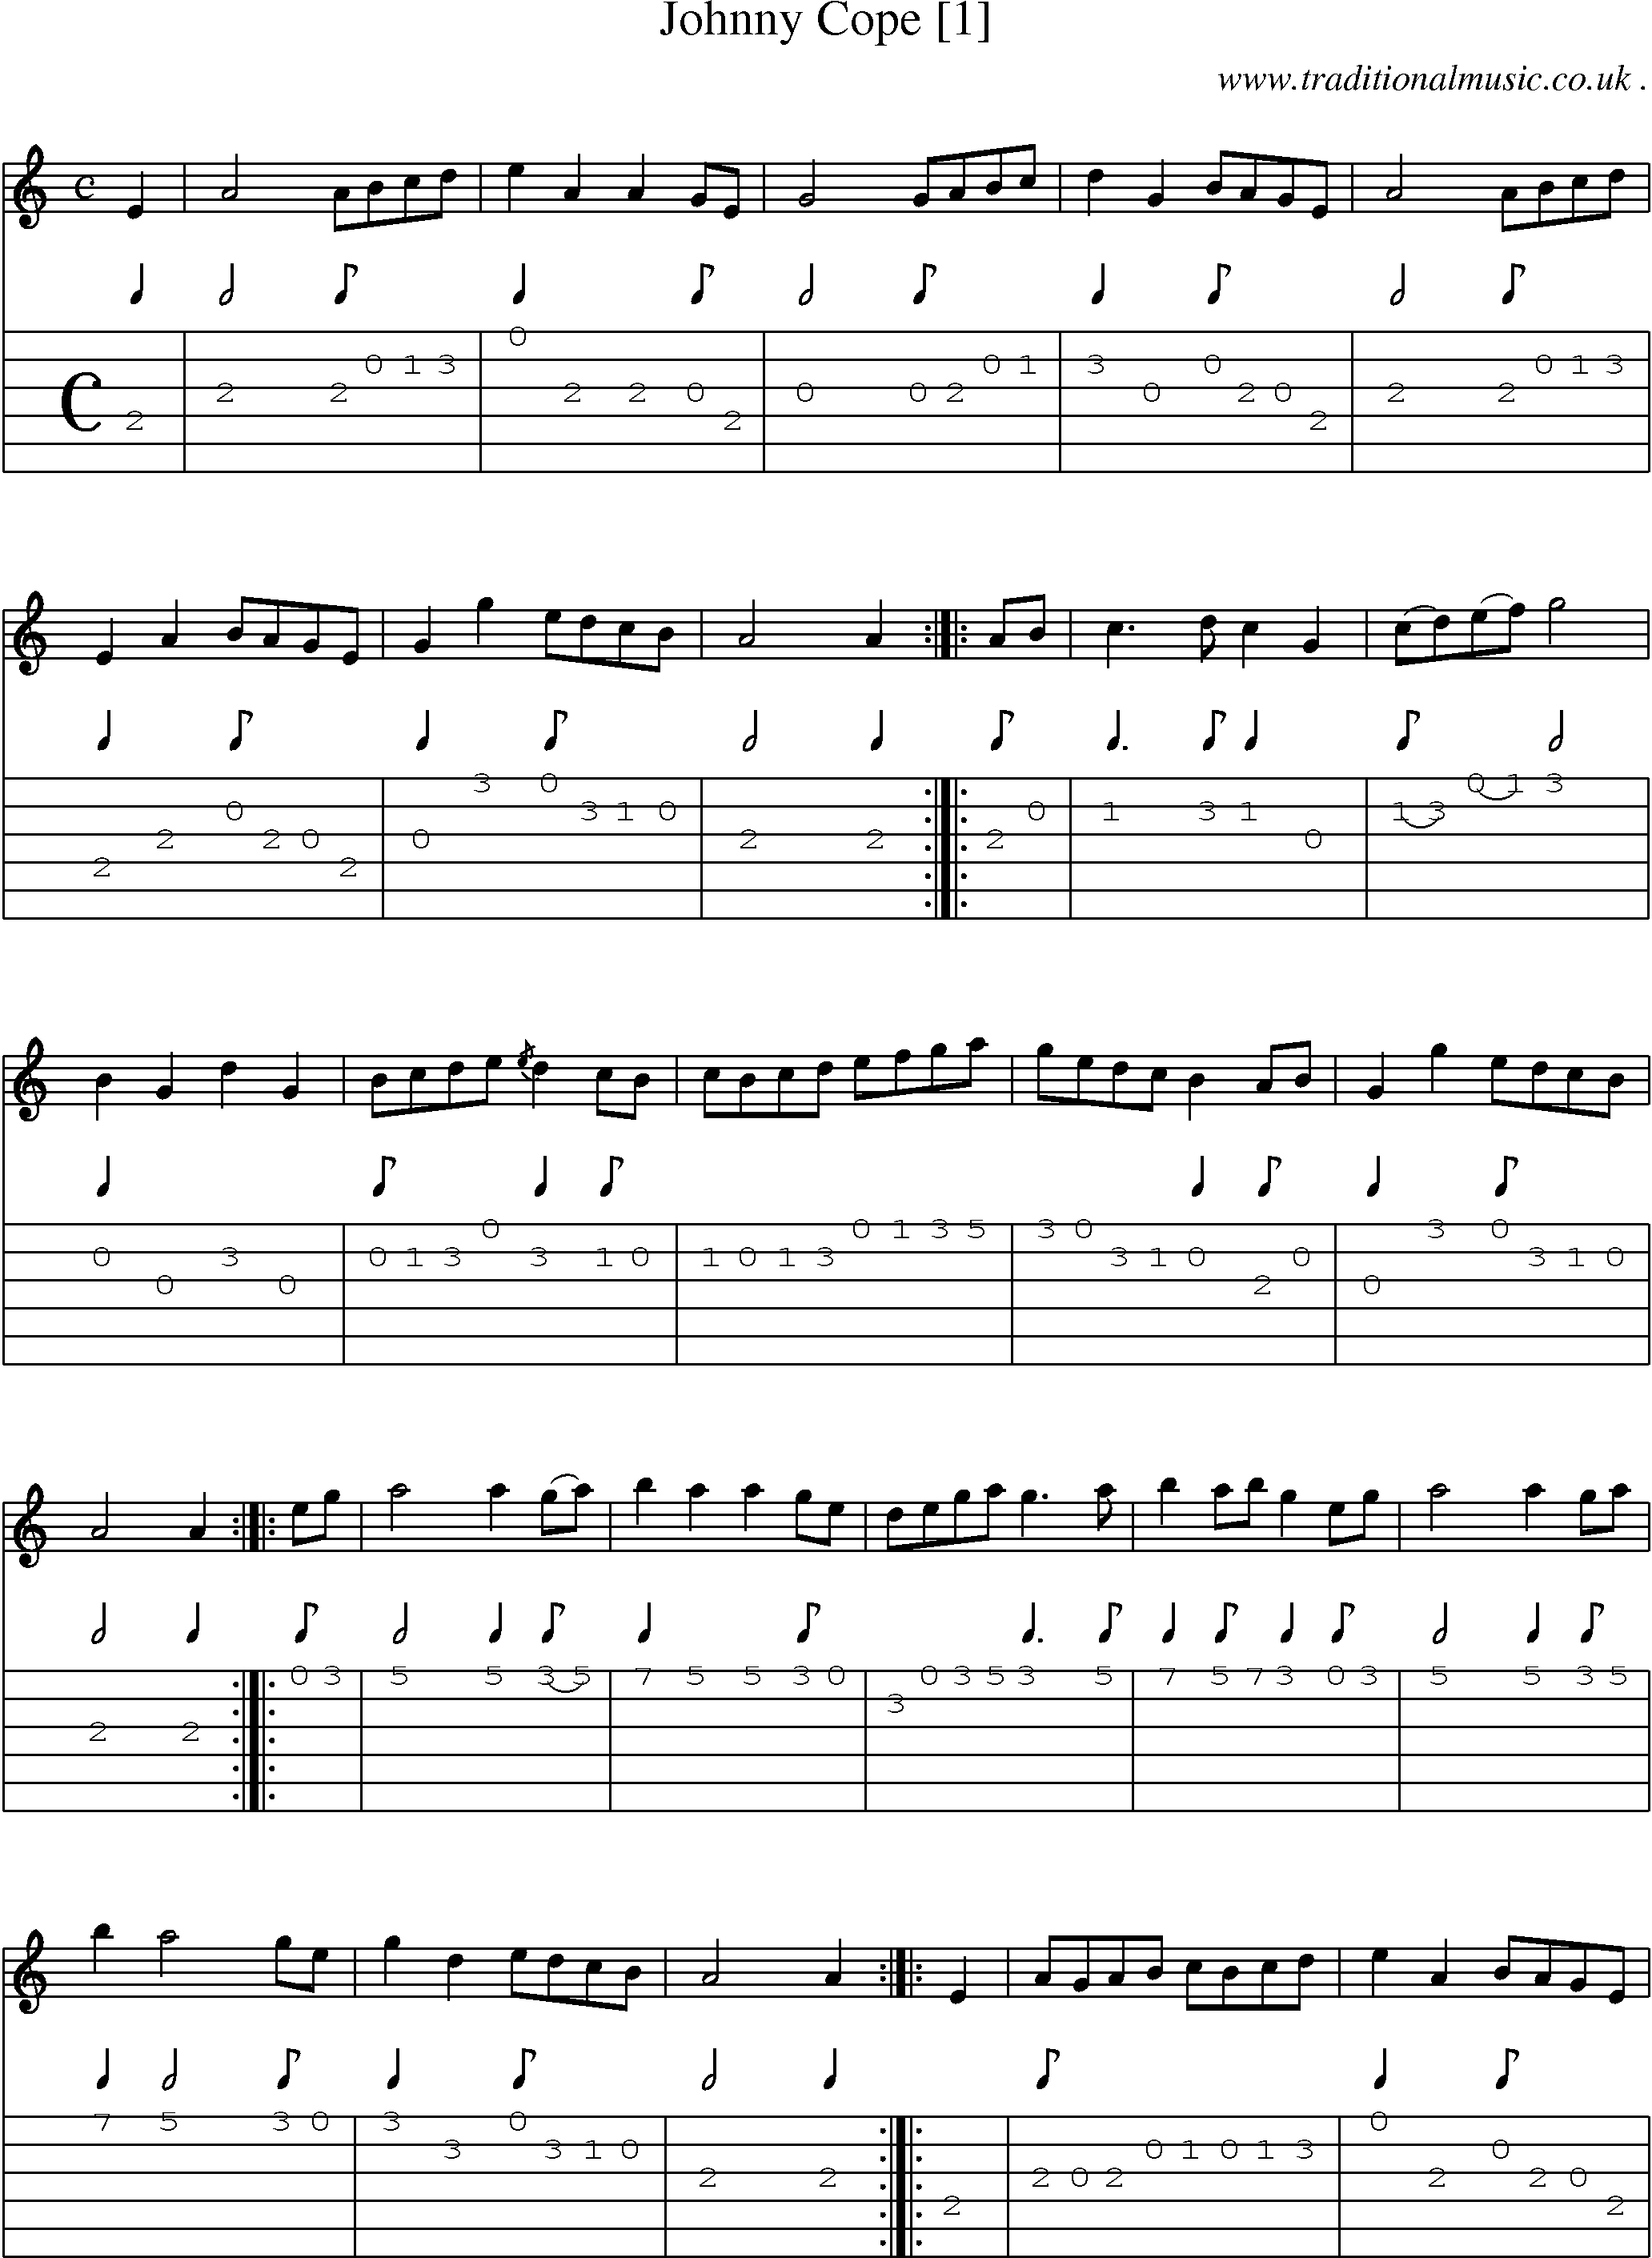 Sheet-music  score, Chords and Guitar Tabs for Johnny Cope [1]